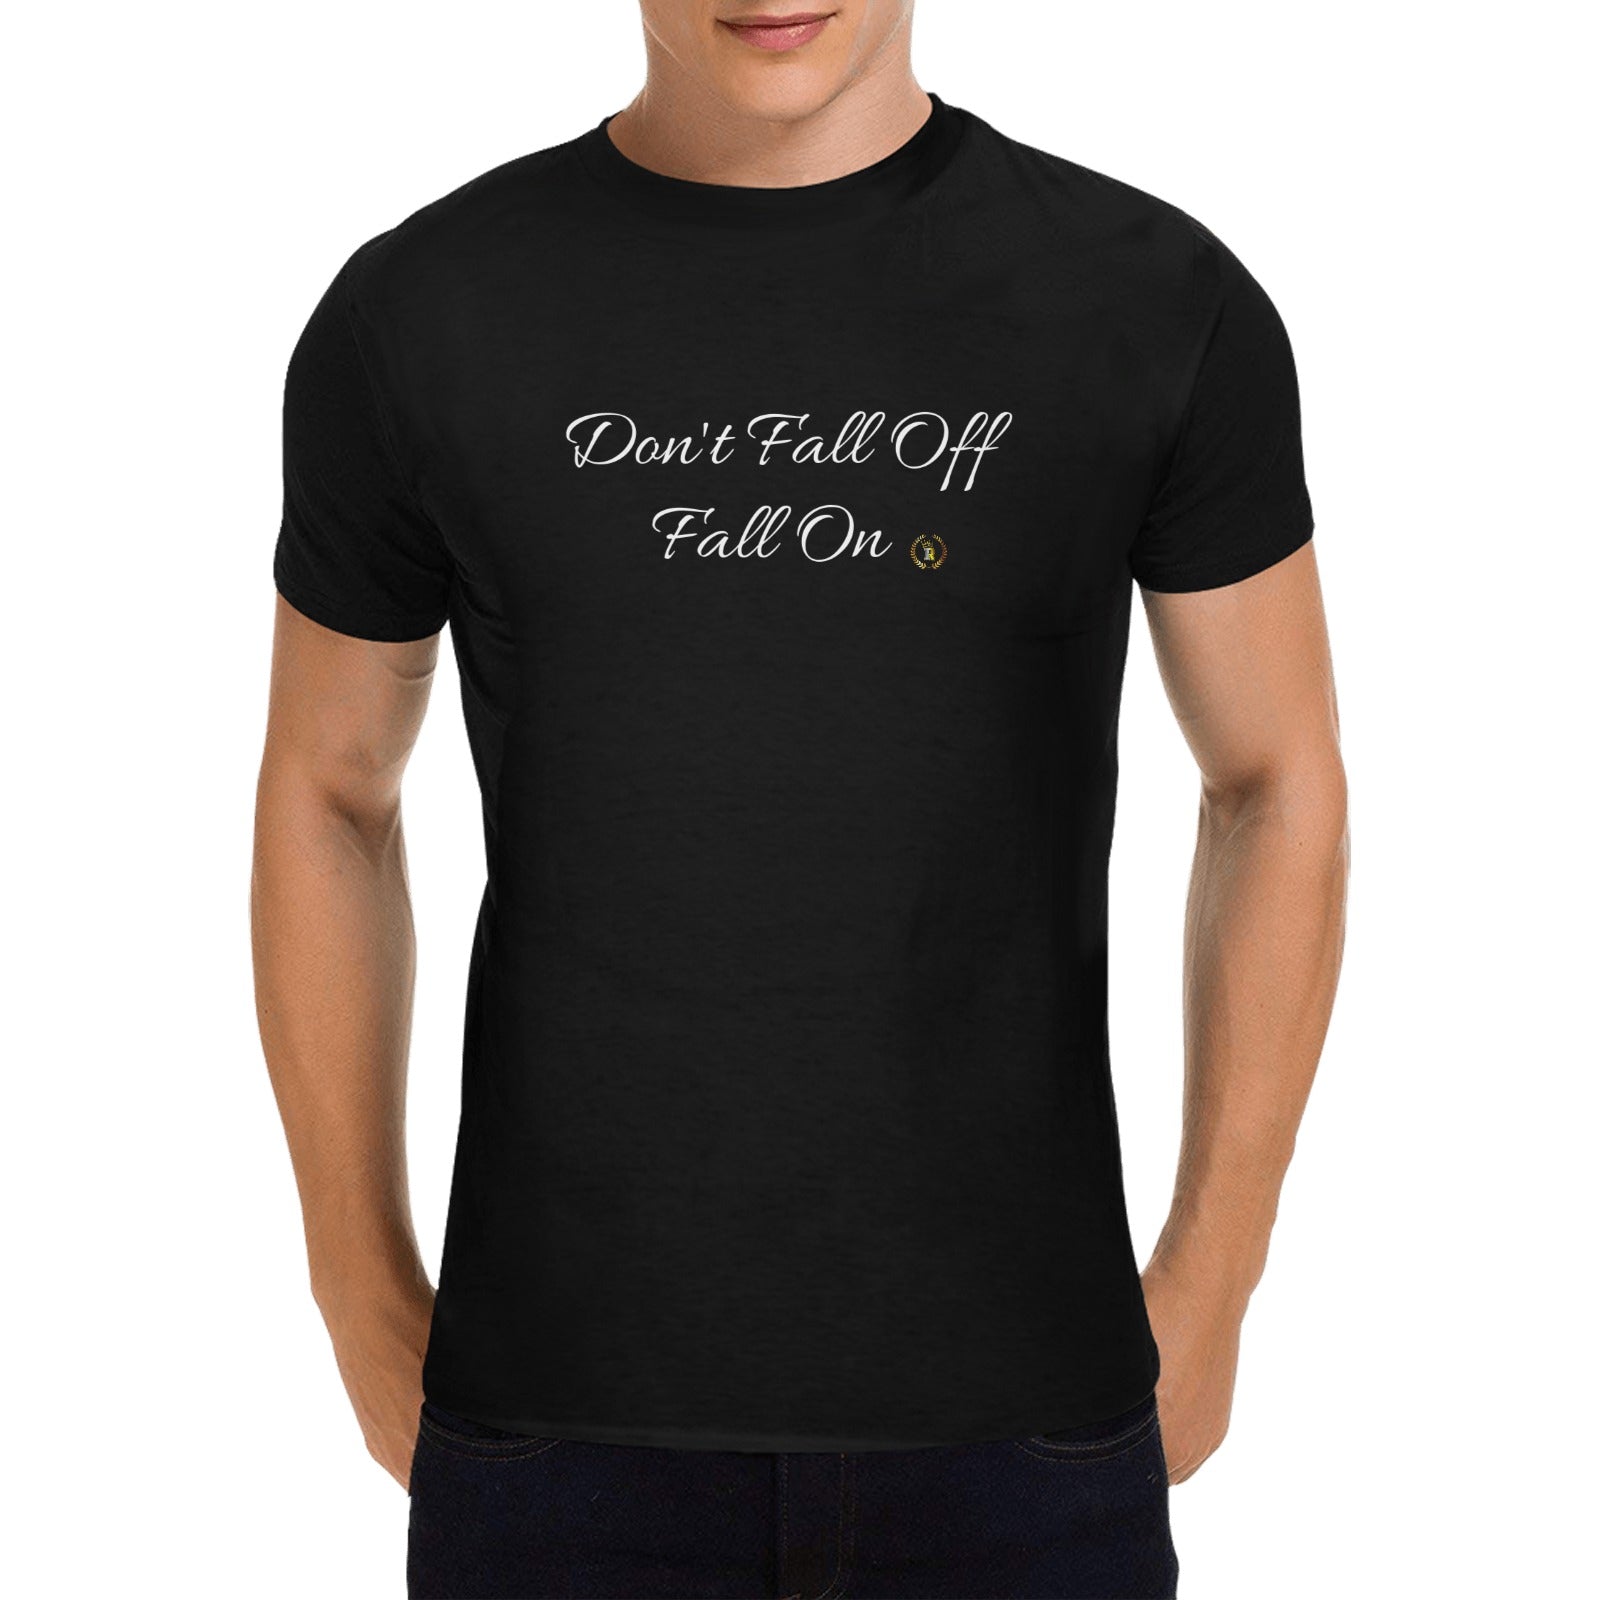 Don't Fall Off Fall On T-shirt 100% Cotton